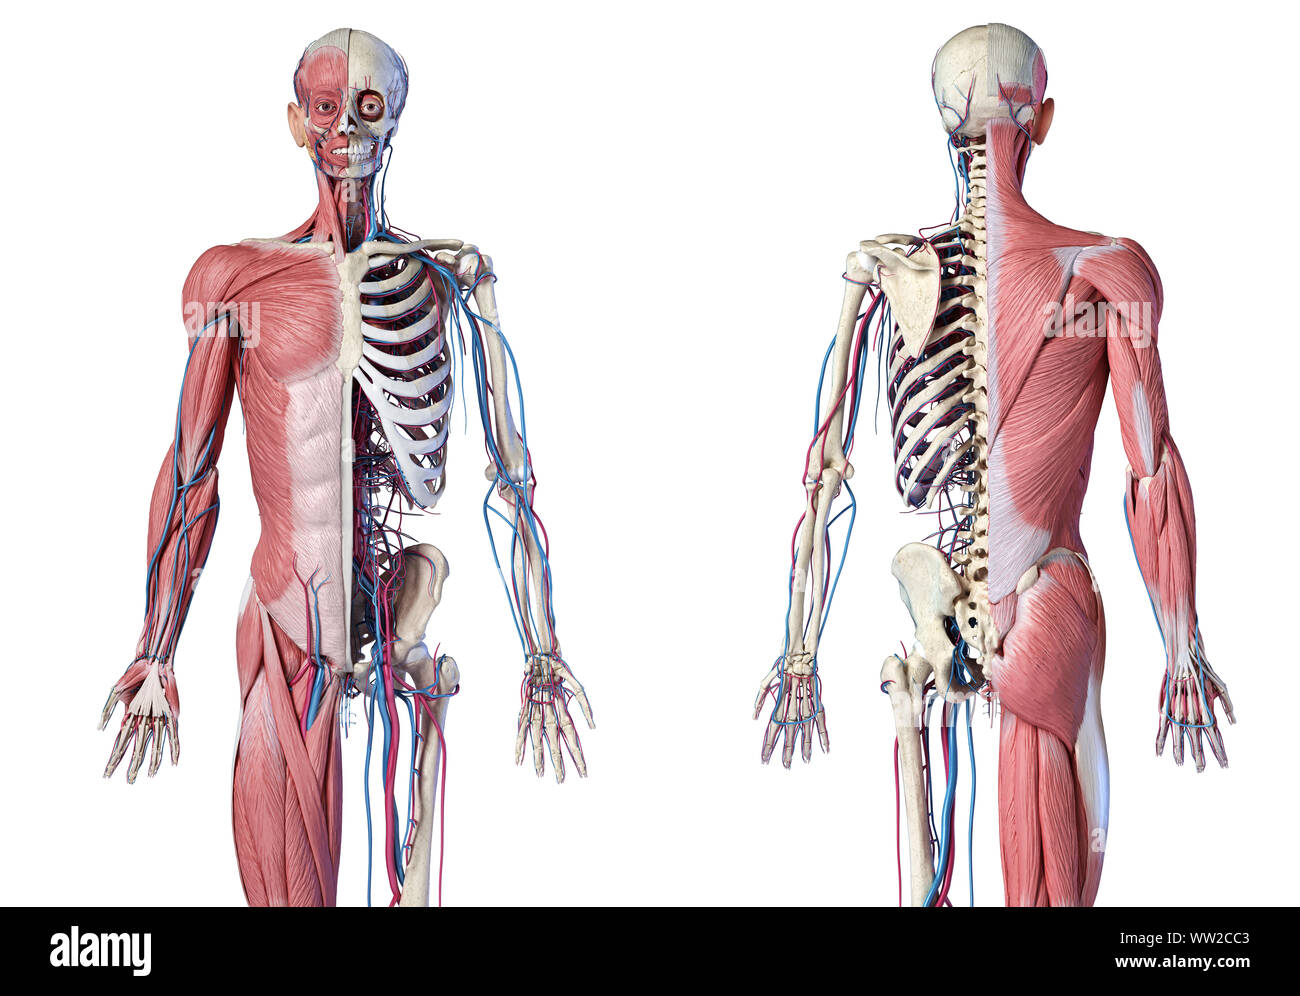 Human Anatomy 3 4 Body Skeletal Muscular And Cardiovascular Systems Front And Back Views On White Background 3d Illustration Stock Photo Alamy